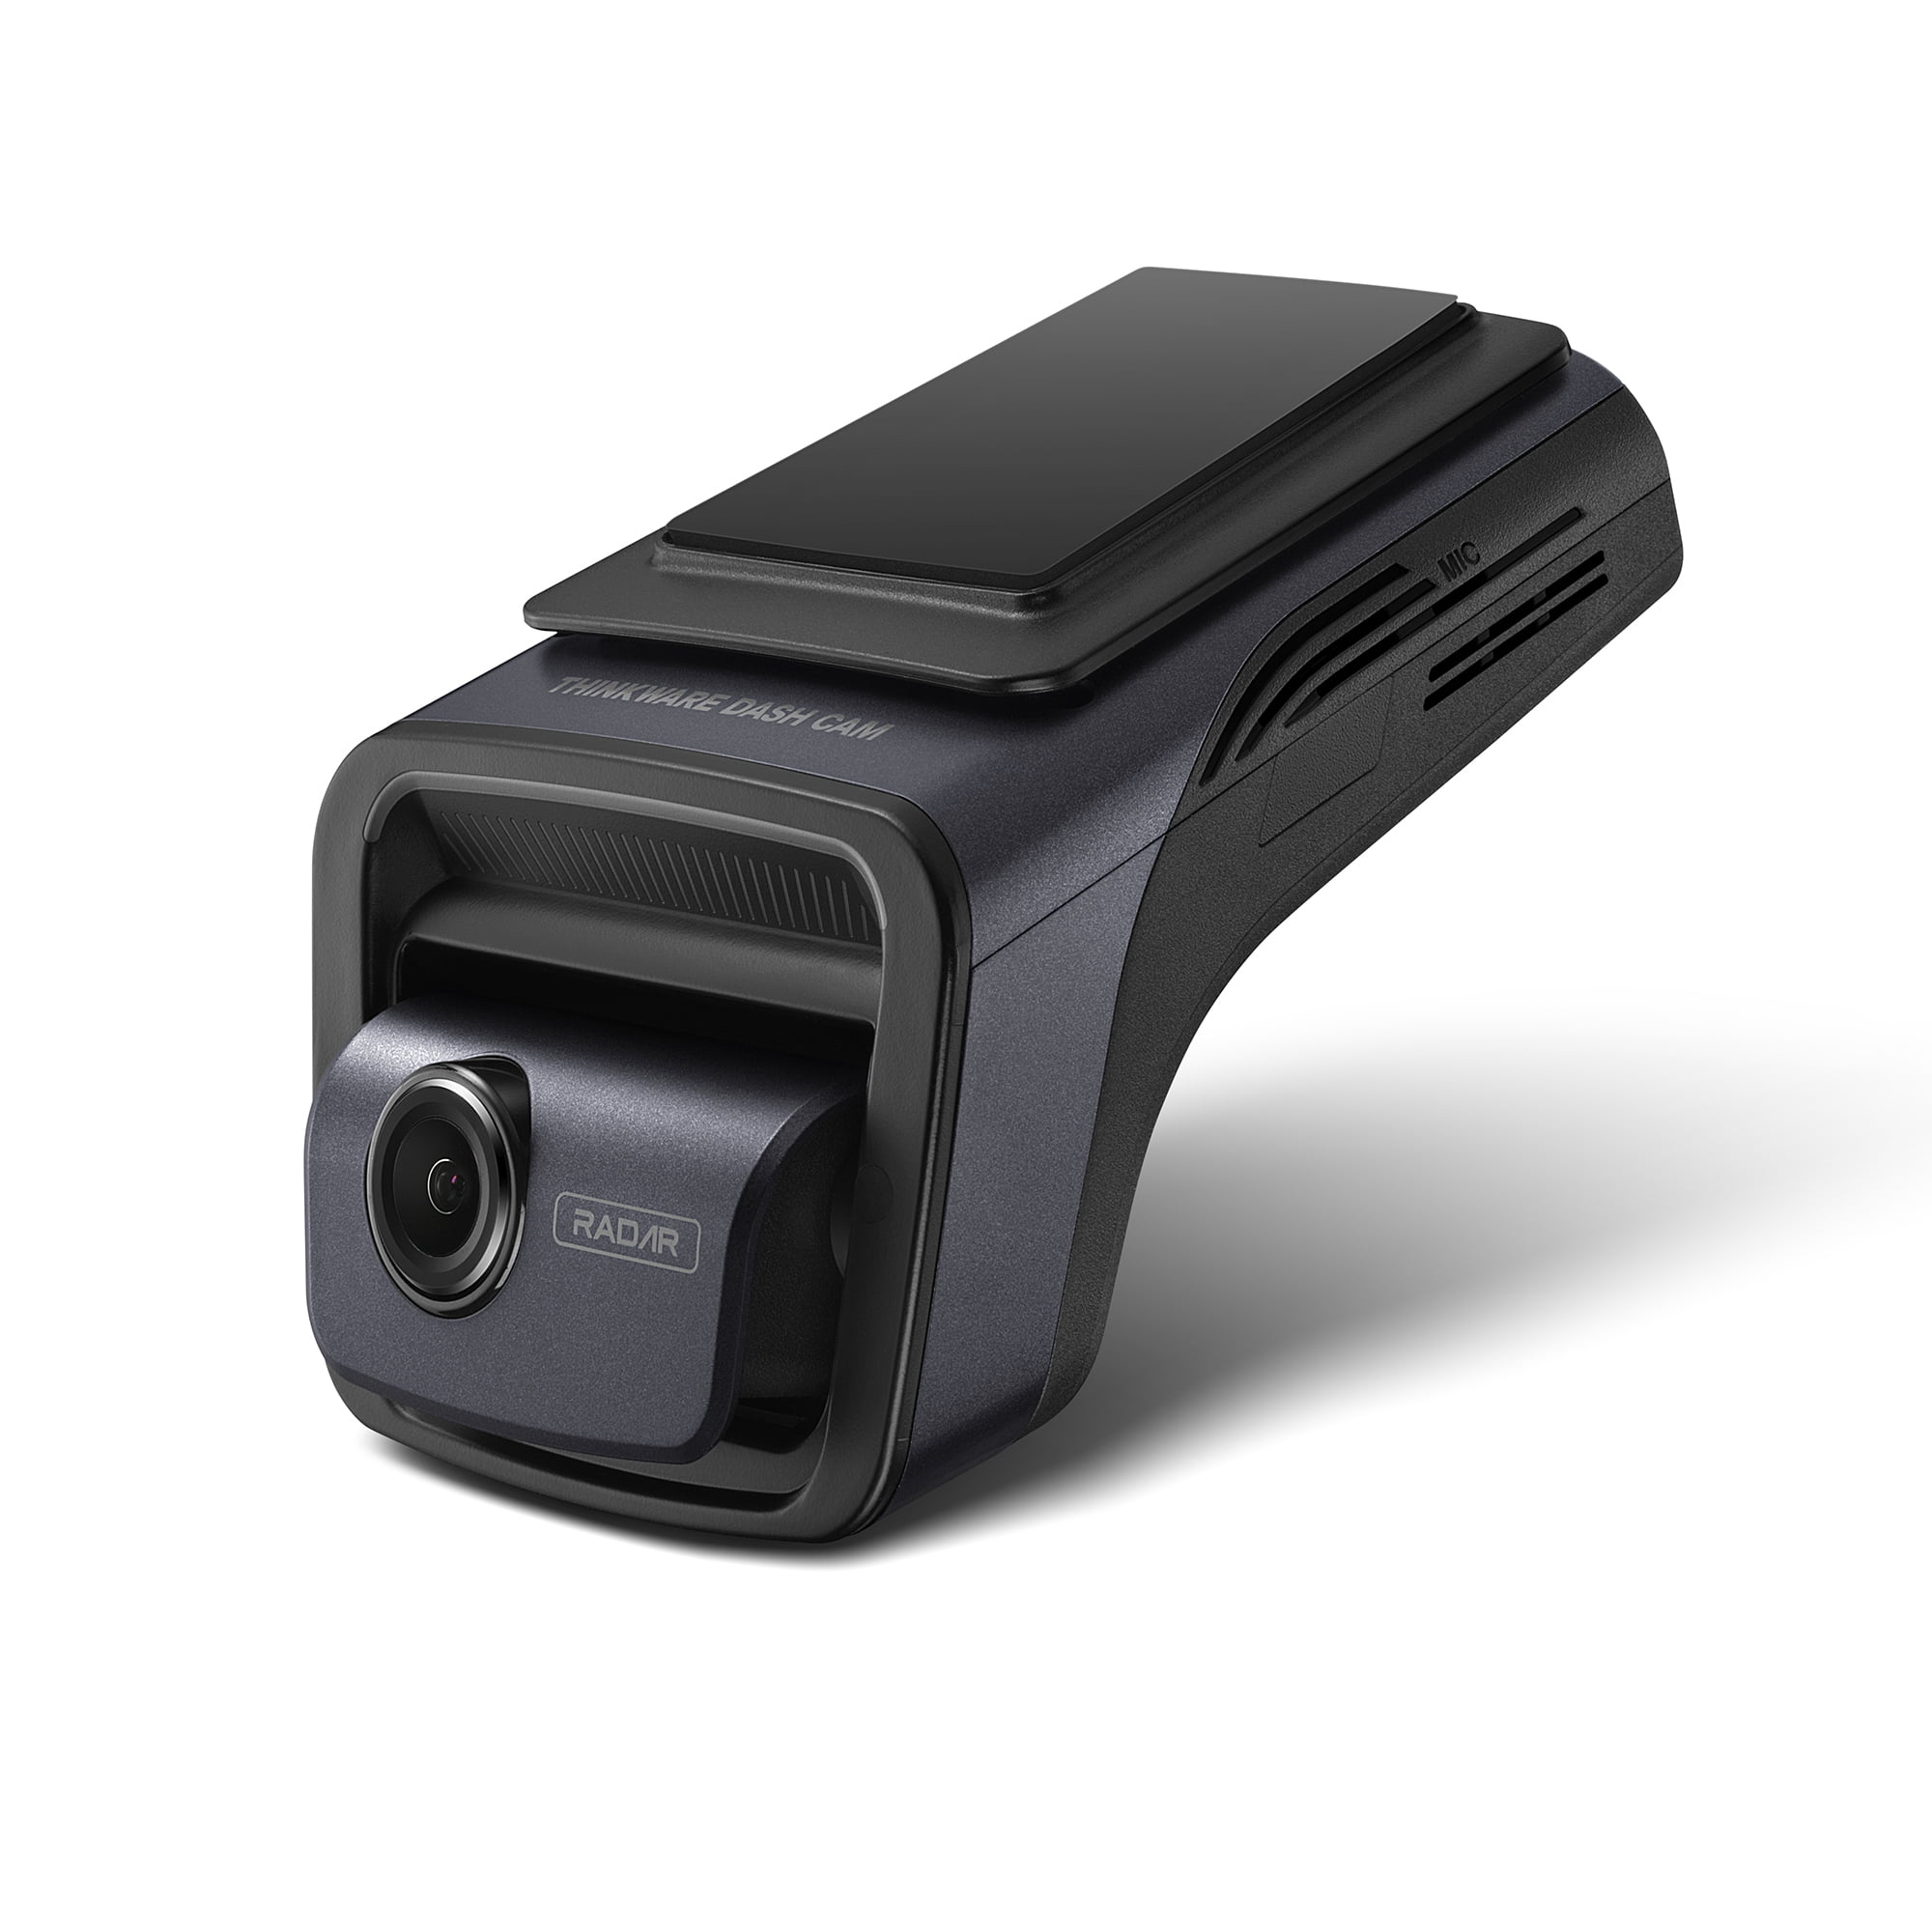 VIOFO A139 Pro 4K HDR Dash Cam STARVIS 2 Sensor, Front and Rear